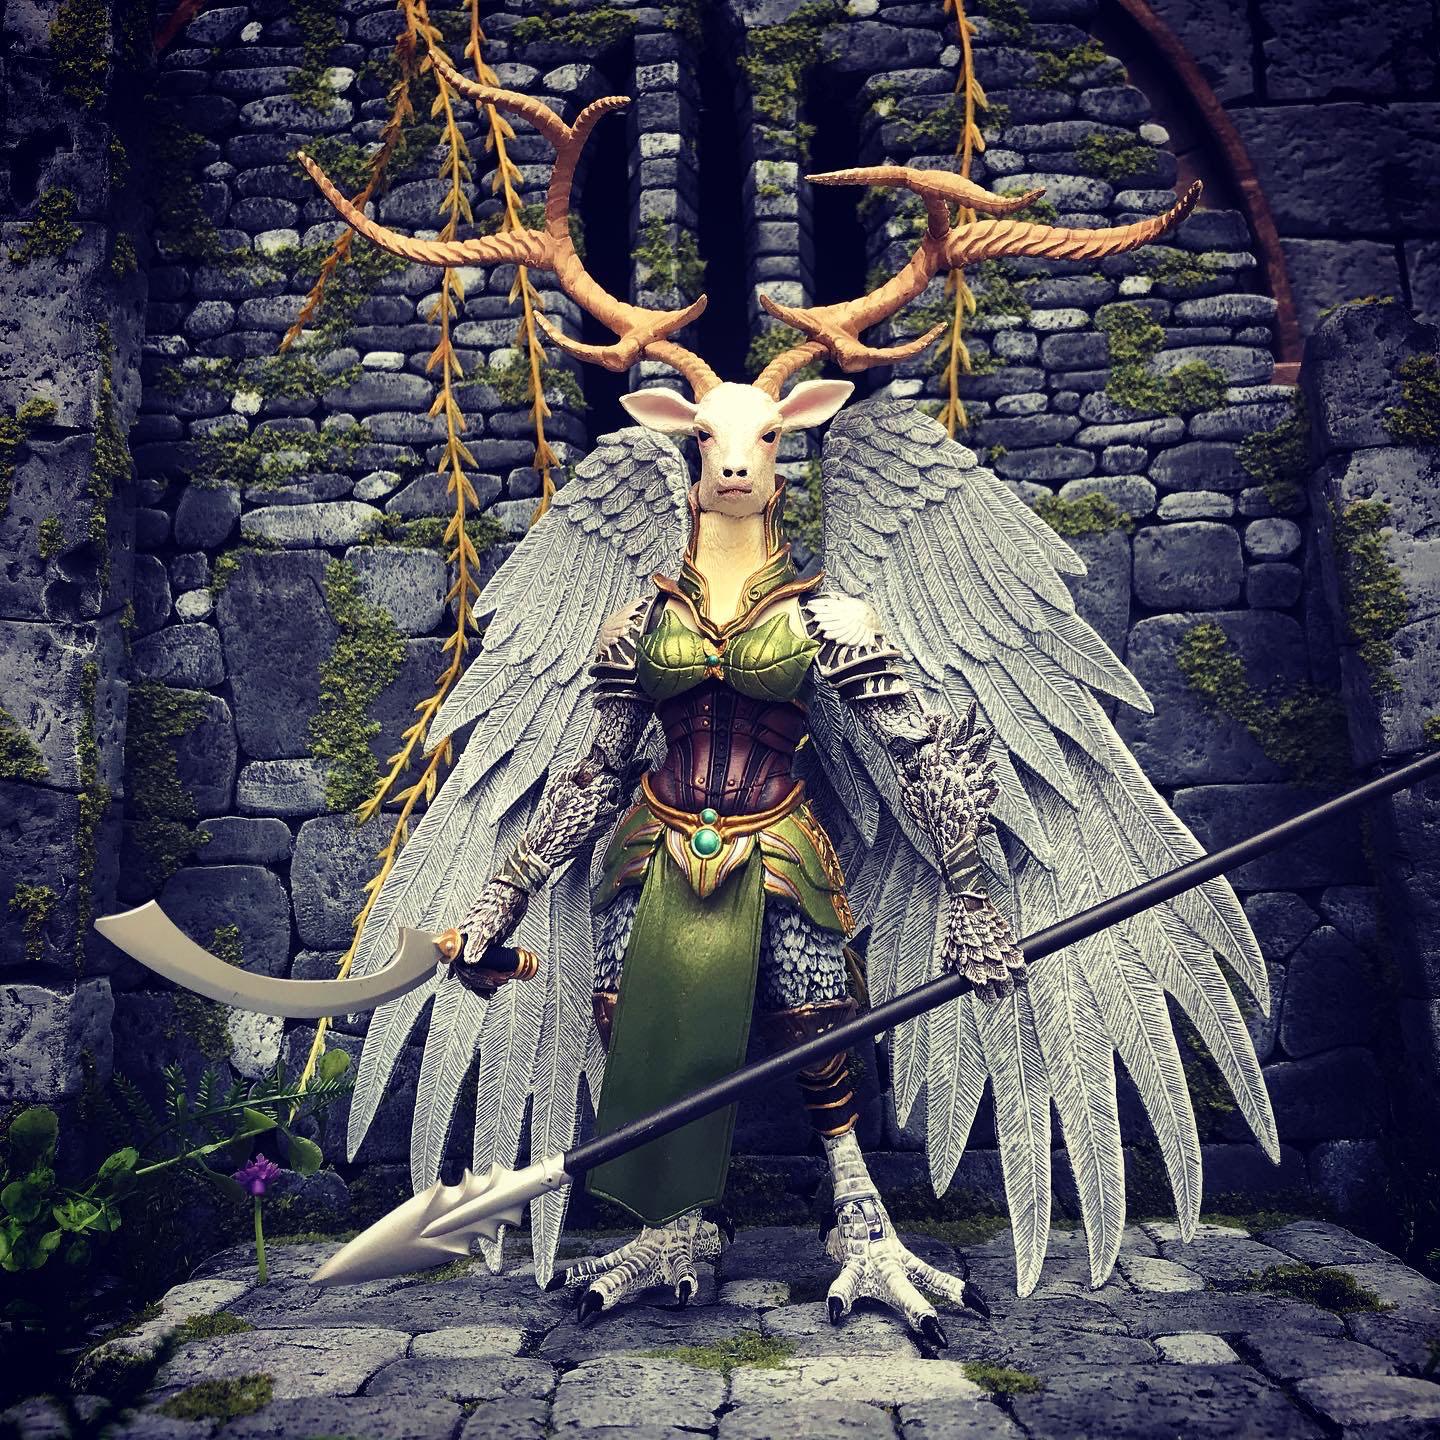 Mythic Legions combined with Four Horsemen bird figures